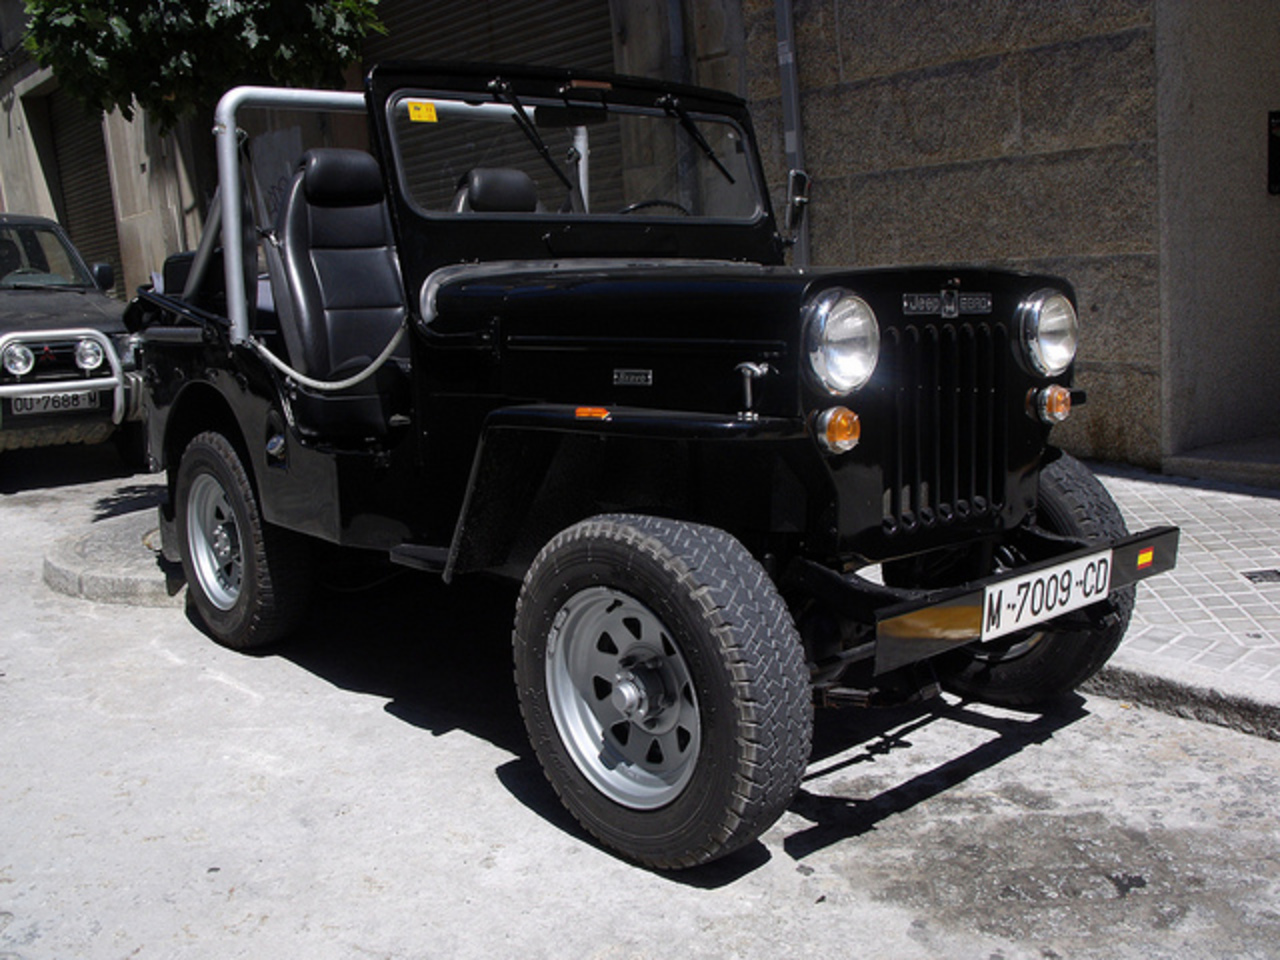 Jeep Ebro Bravo L: Photo gallery, complete information about model ...